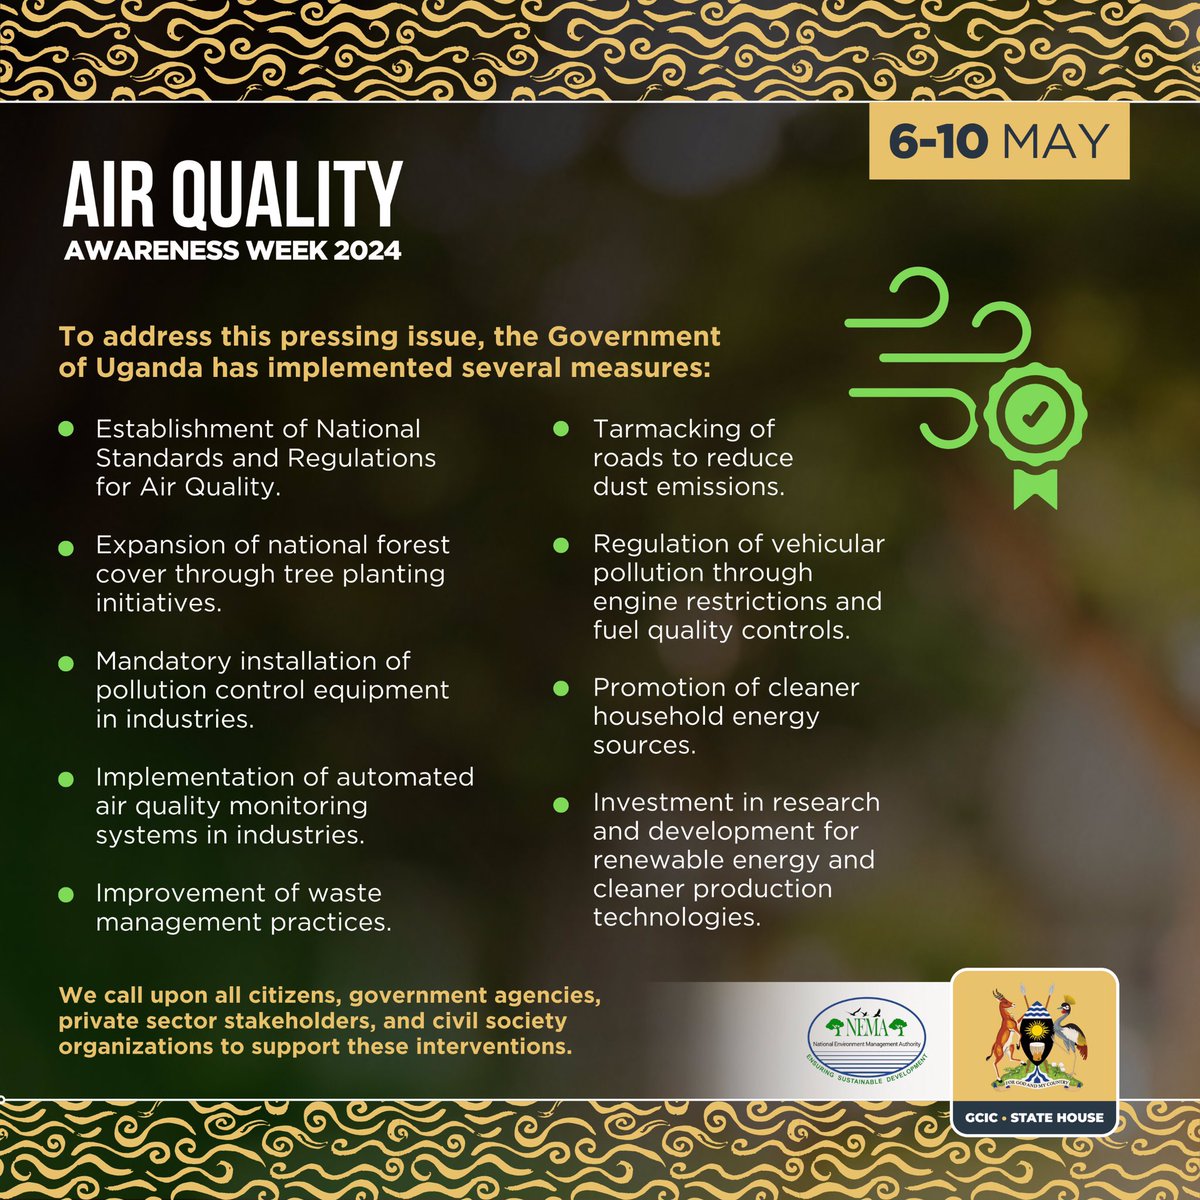 Today is the last day of 
#AirQualityAwarenessWeek 

'Know your Air'